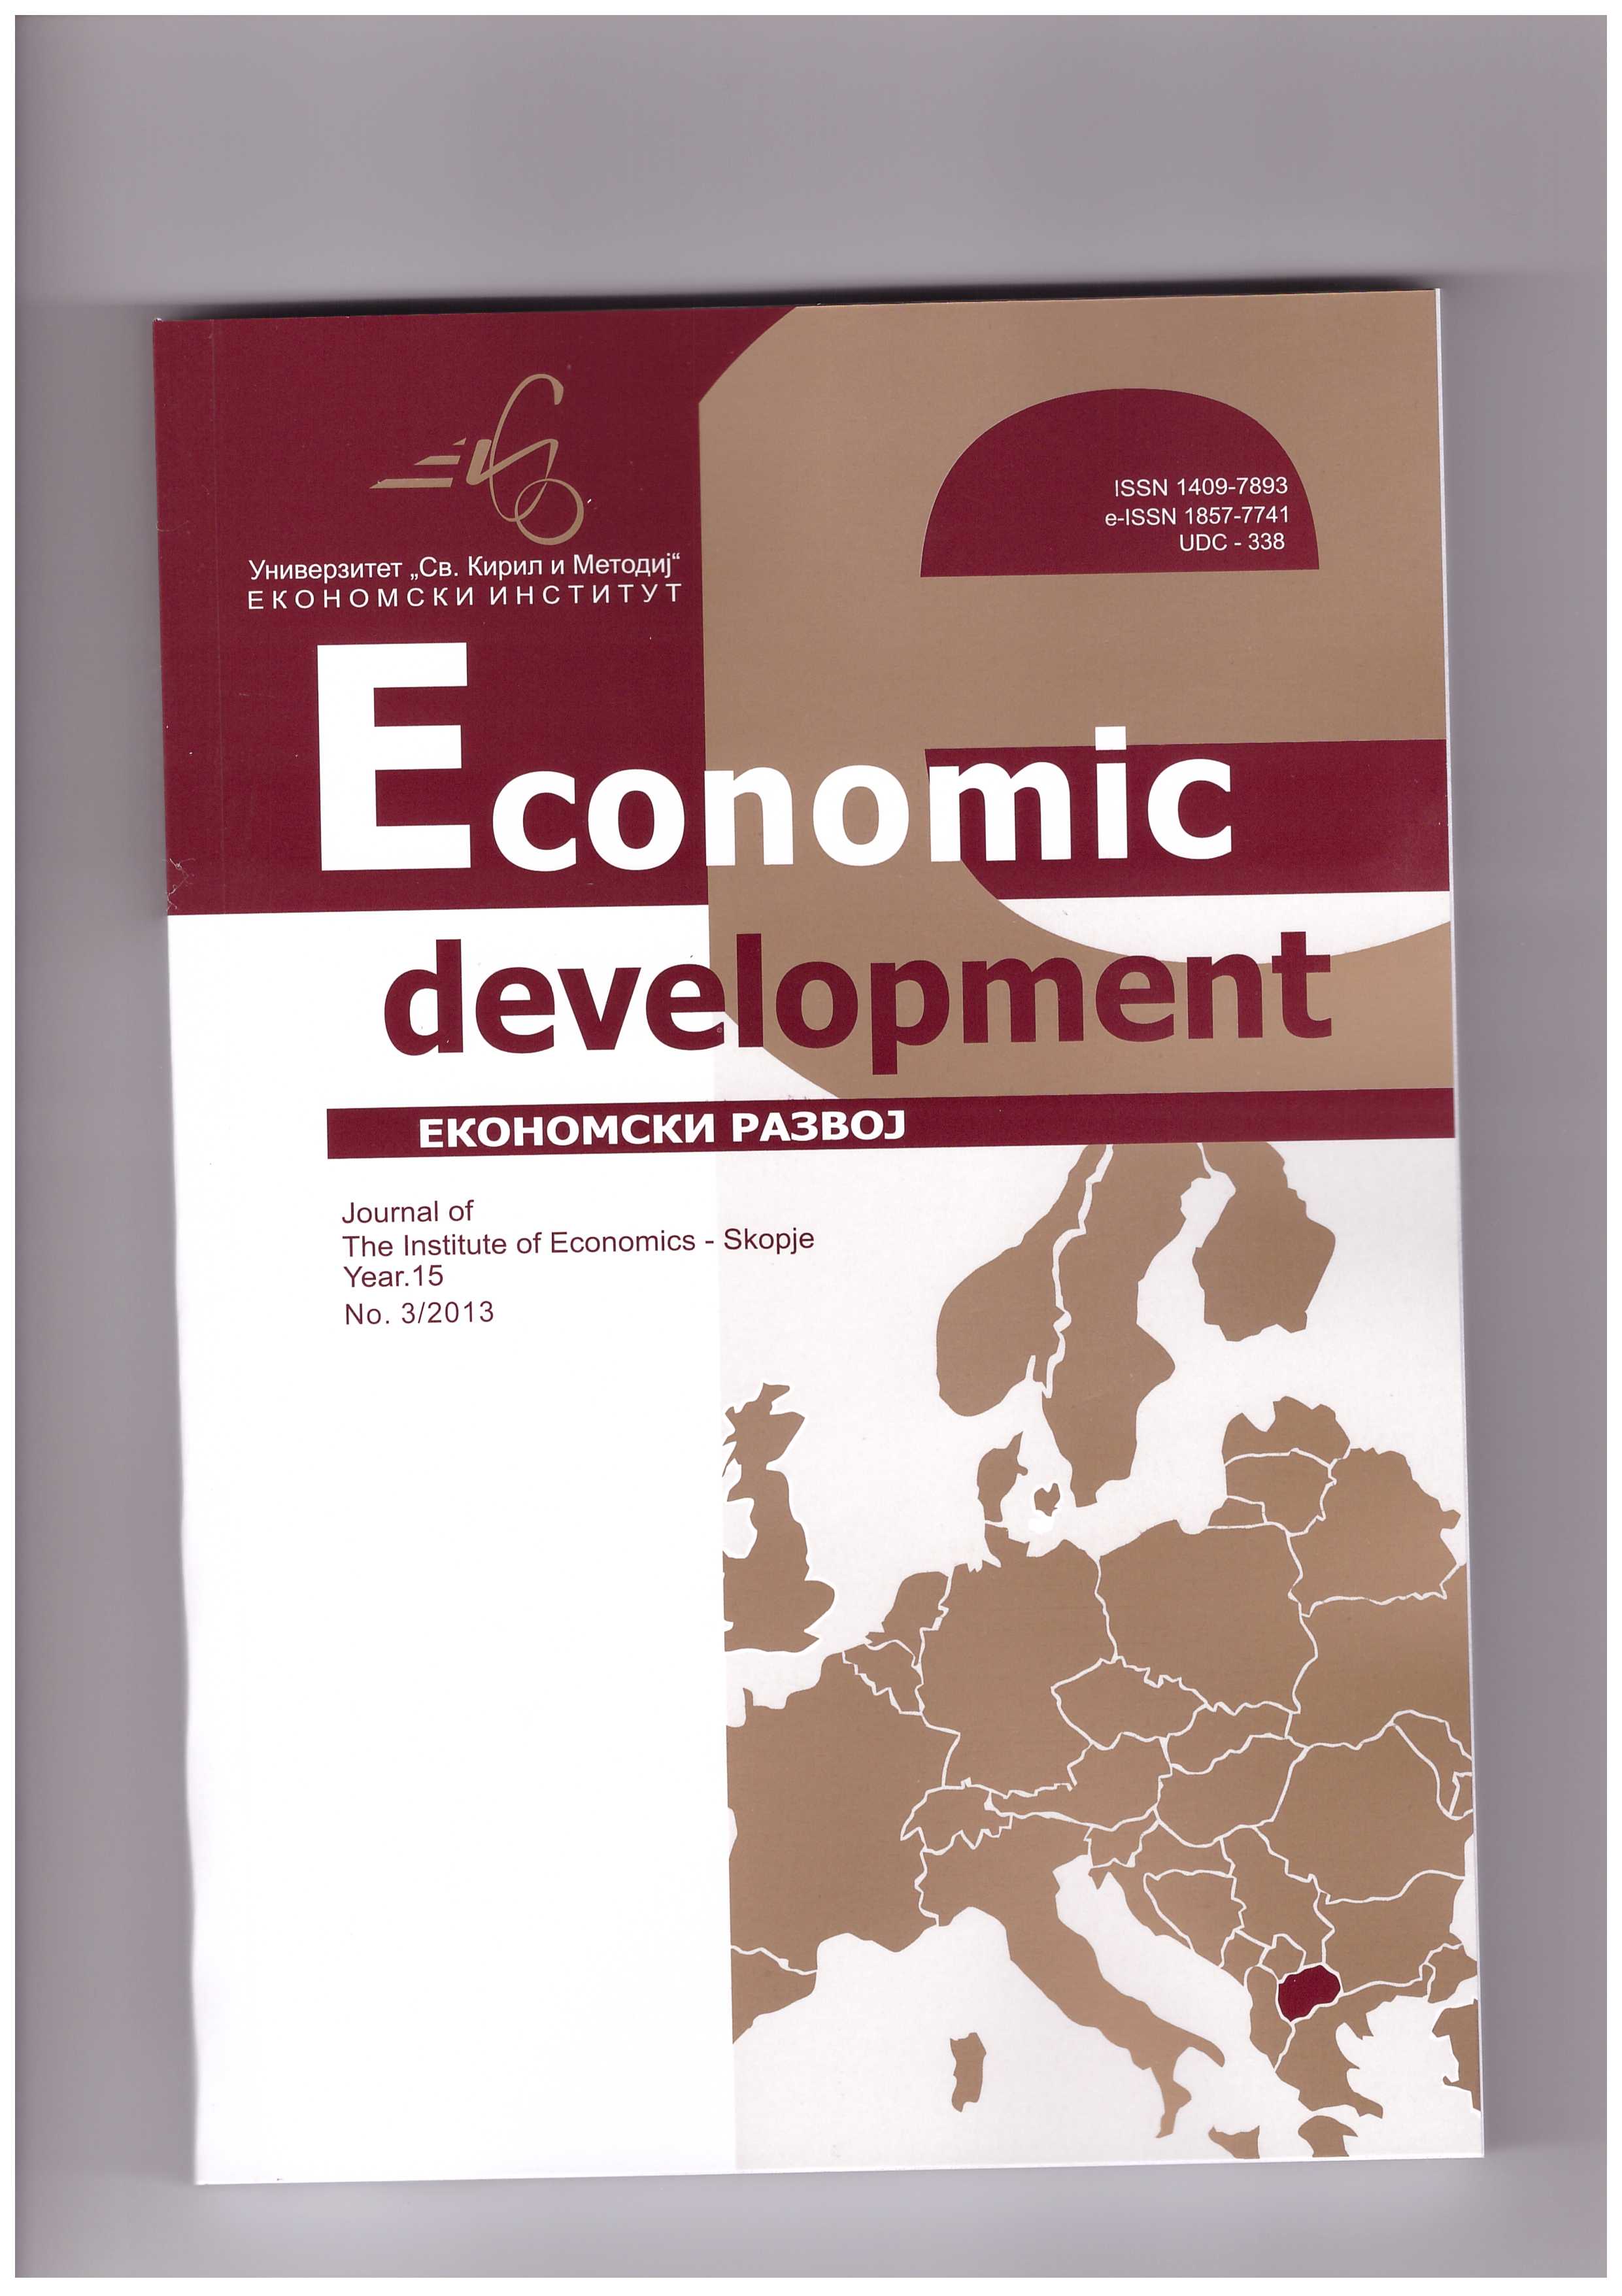 Self employment program via crediting as an incentive for increasing entrepreneurial activity in Republic of Macedonia